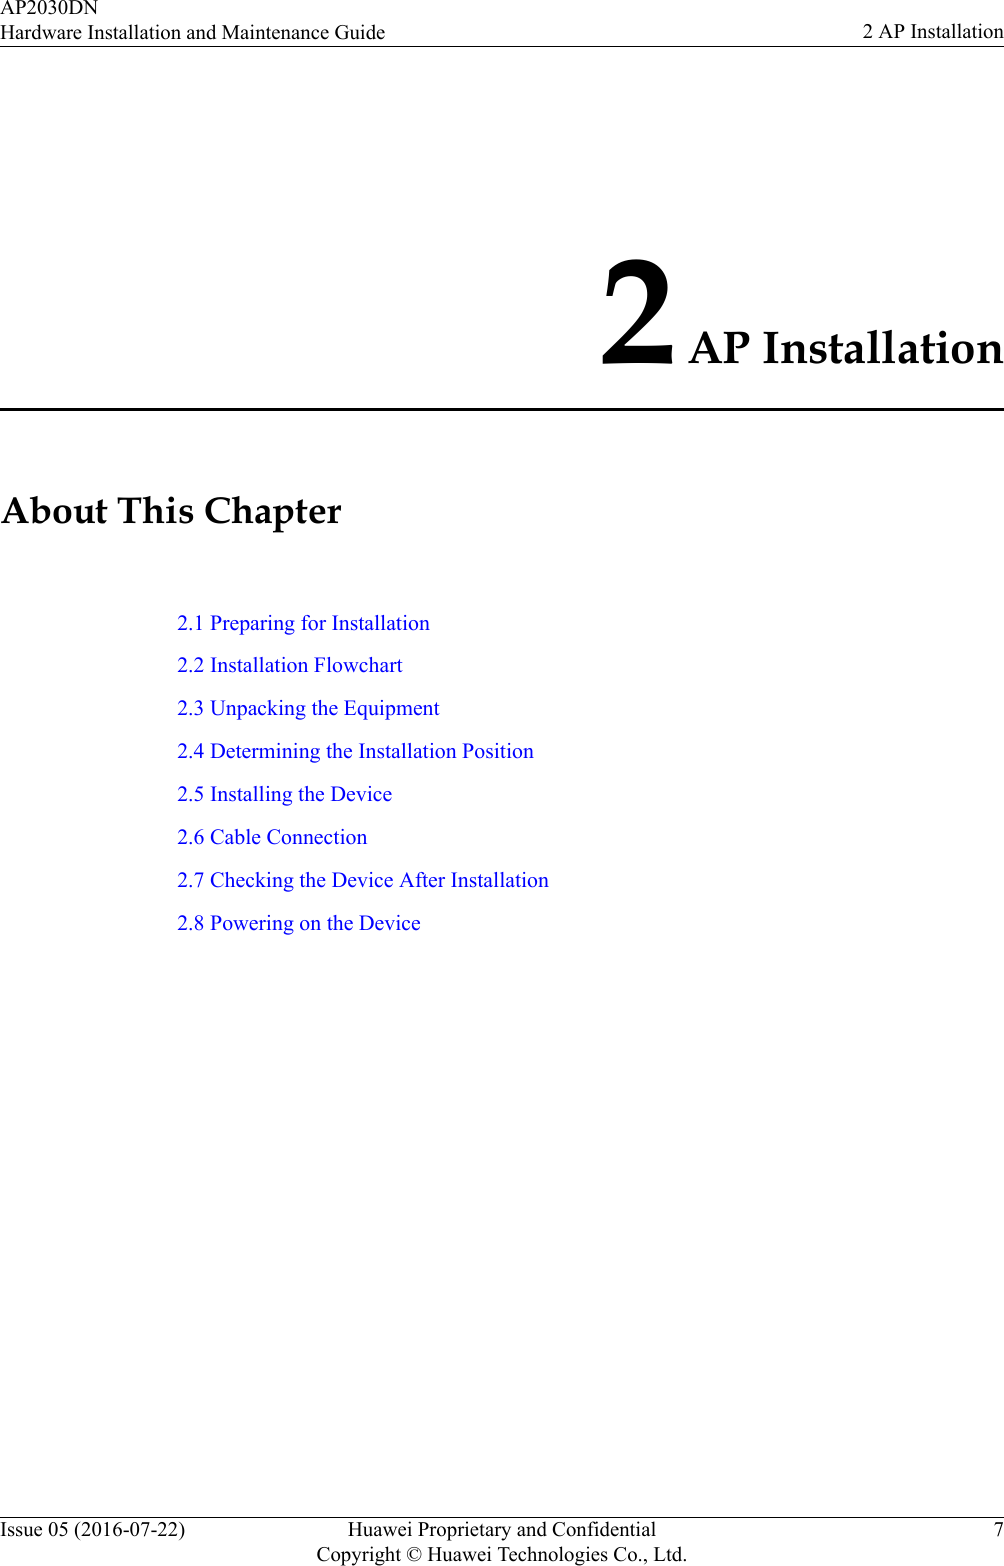 2 AP InstallationAbout This Chapter2.1 Preparing for Installation2.2 Installation Flowchart2.3 Unpacking the Equipment2.4 Determining the Installation Position2.5 Installing the Device2.6 Cable Connection2.7 Checking the Device After Installation2.8 Powering on the DeviceAP2030DNHardware Installation and Maintenance Guide 2 AP InstallationIssue 05 (2016-07-22) Huawei Proprietary and ConfidentialCopyright © Huawei Technologies Co., Ltd.7